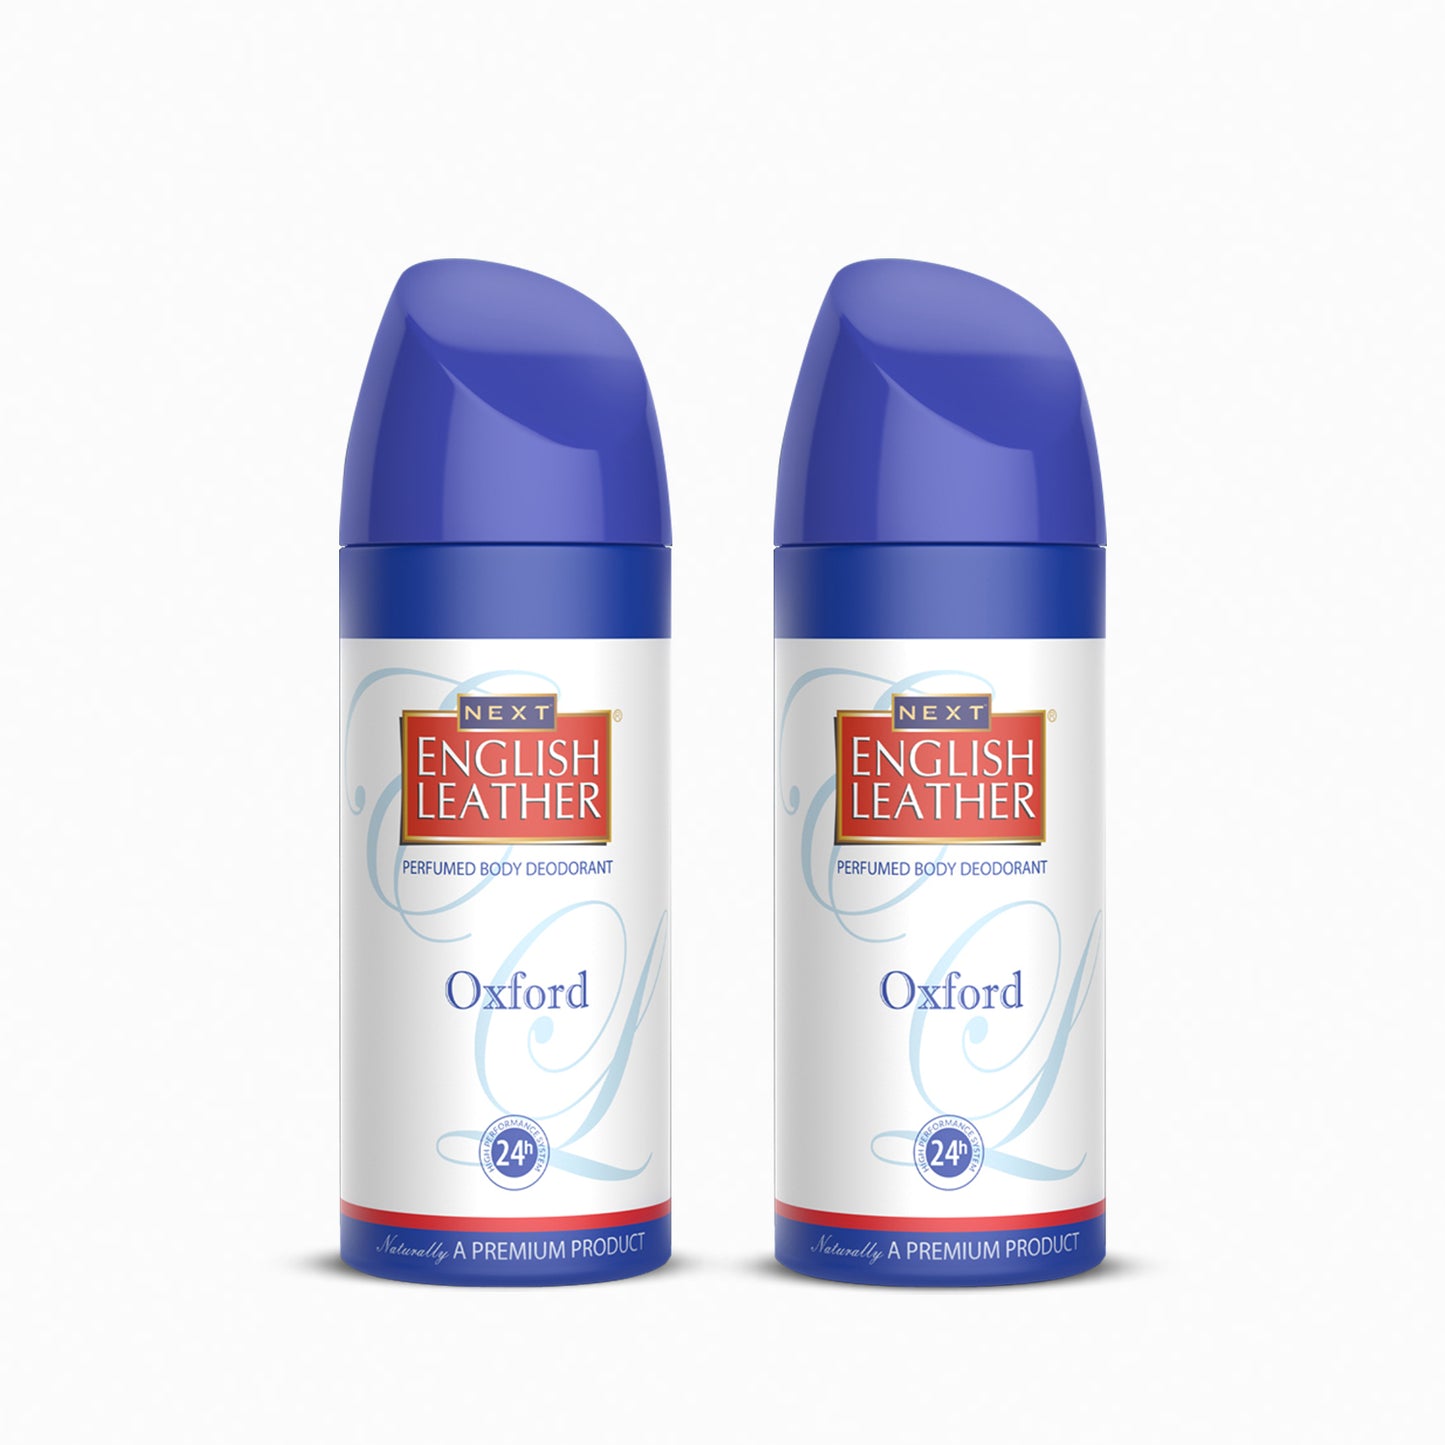 NEXT ENGLISH LEATHER Oxford White Perfumed body Deodorant for Men and Women - 2 x 150ml each